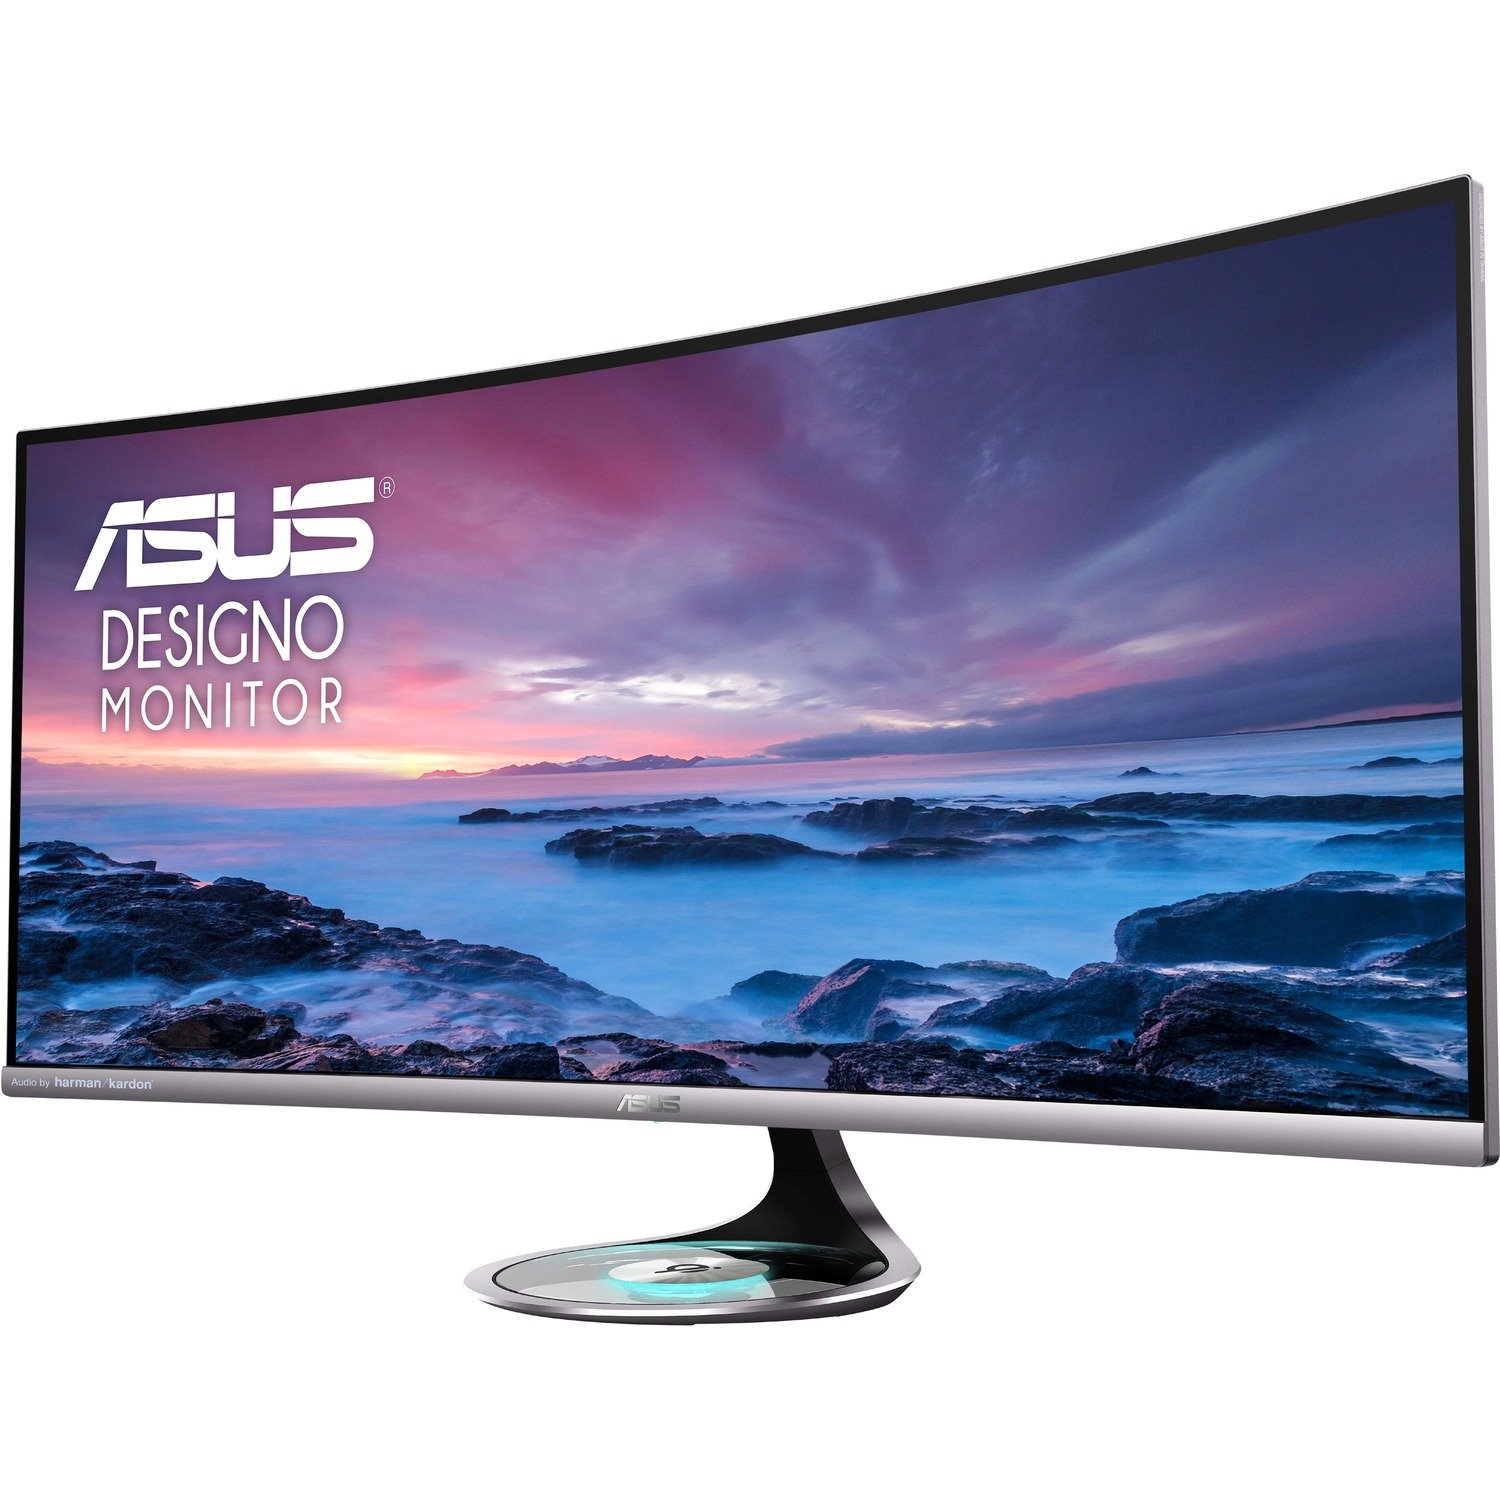 Asus Designo MX38VC 95.3 cm (37.5") UW-QHD+ Curved Screen WLED Gaming LCD Monitor - 21:9 - Black, Space Gray